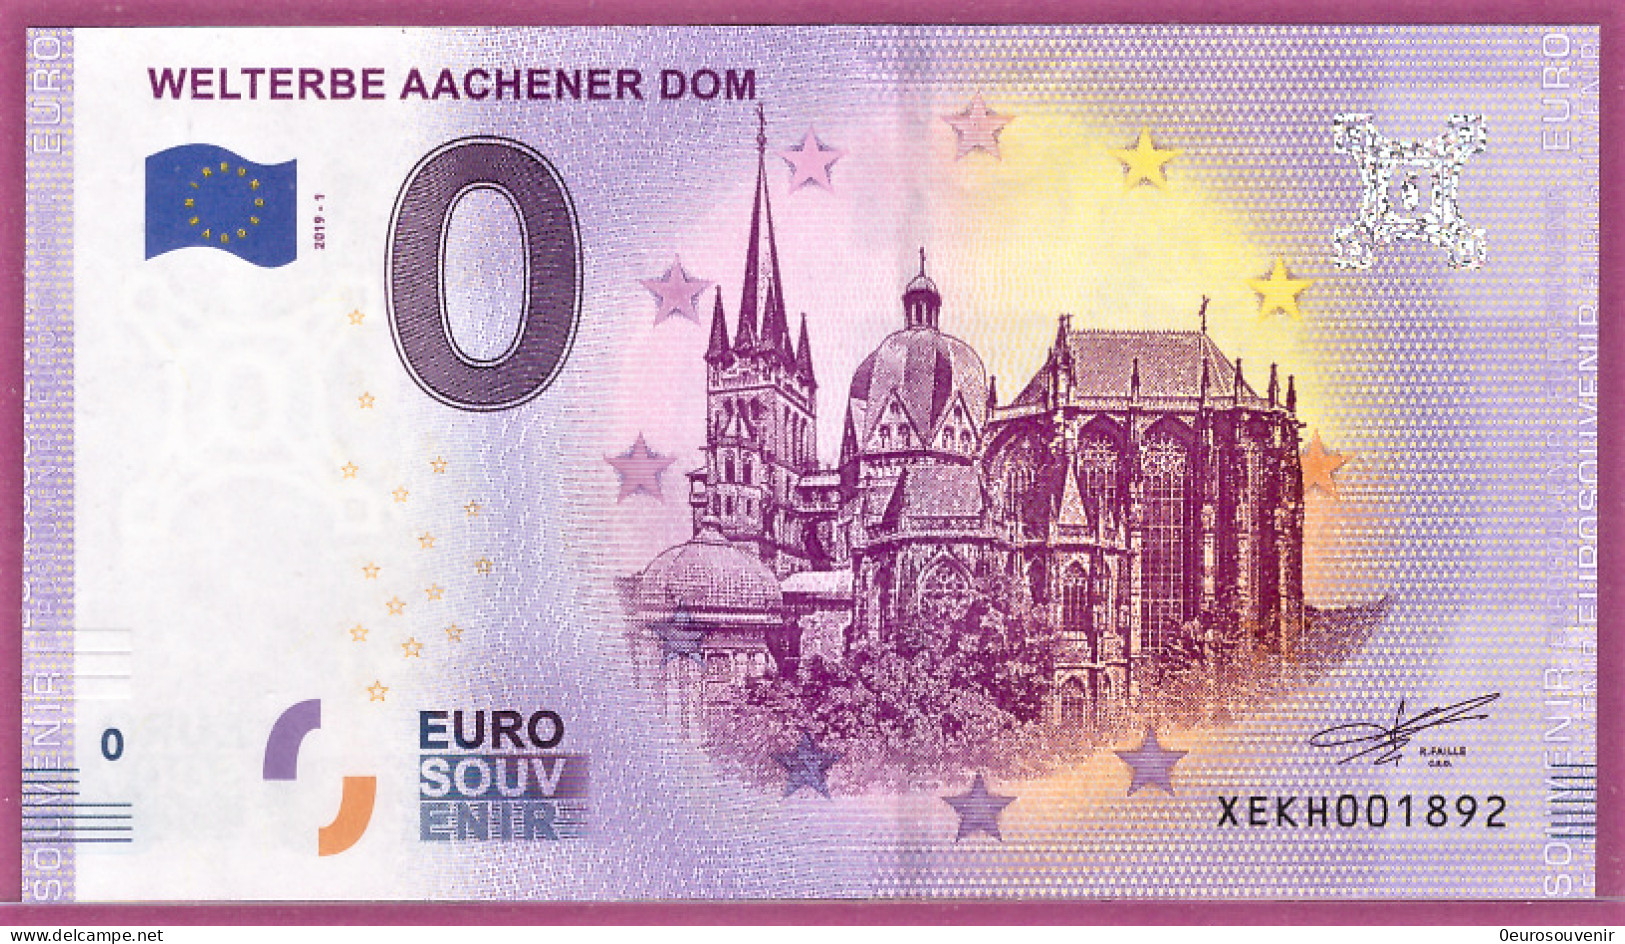 0-Euro XEKH 2019-1 WELTERBE AACHENER DOM - Private Proofs / Unofficial